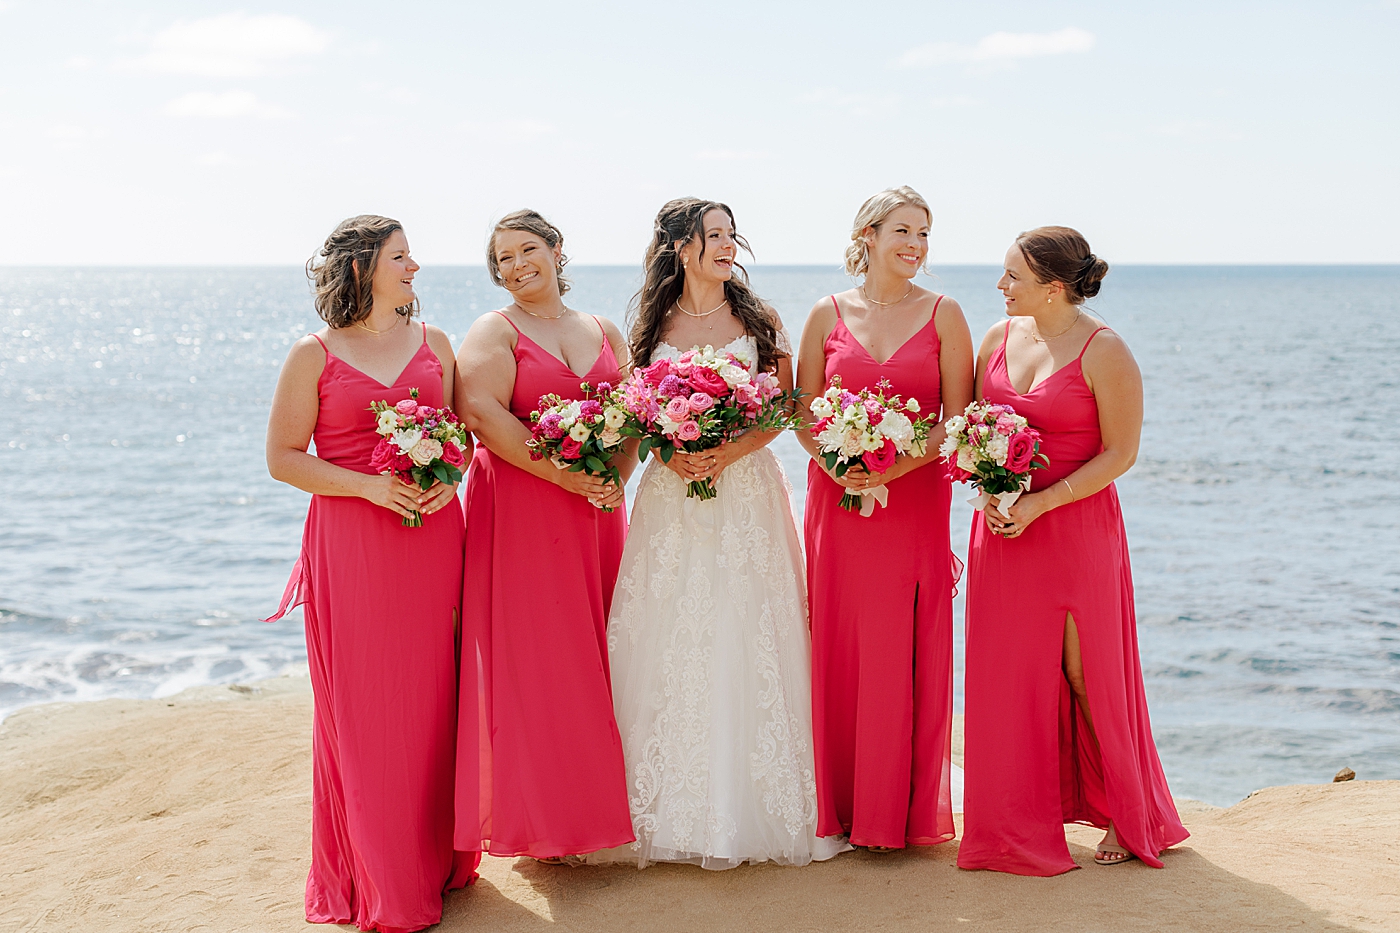 Bride and bridesmaids in bright pink dresses on the beach by the water | Image by Hope Helmuth Photography